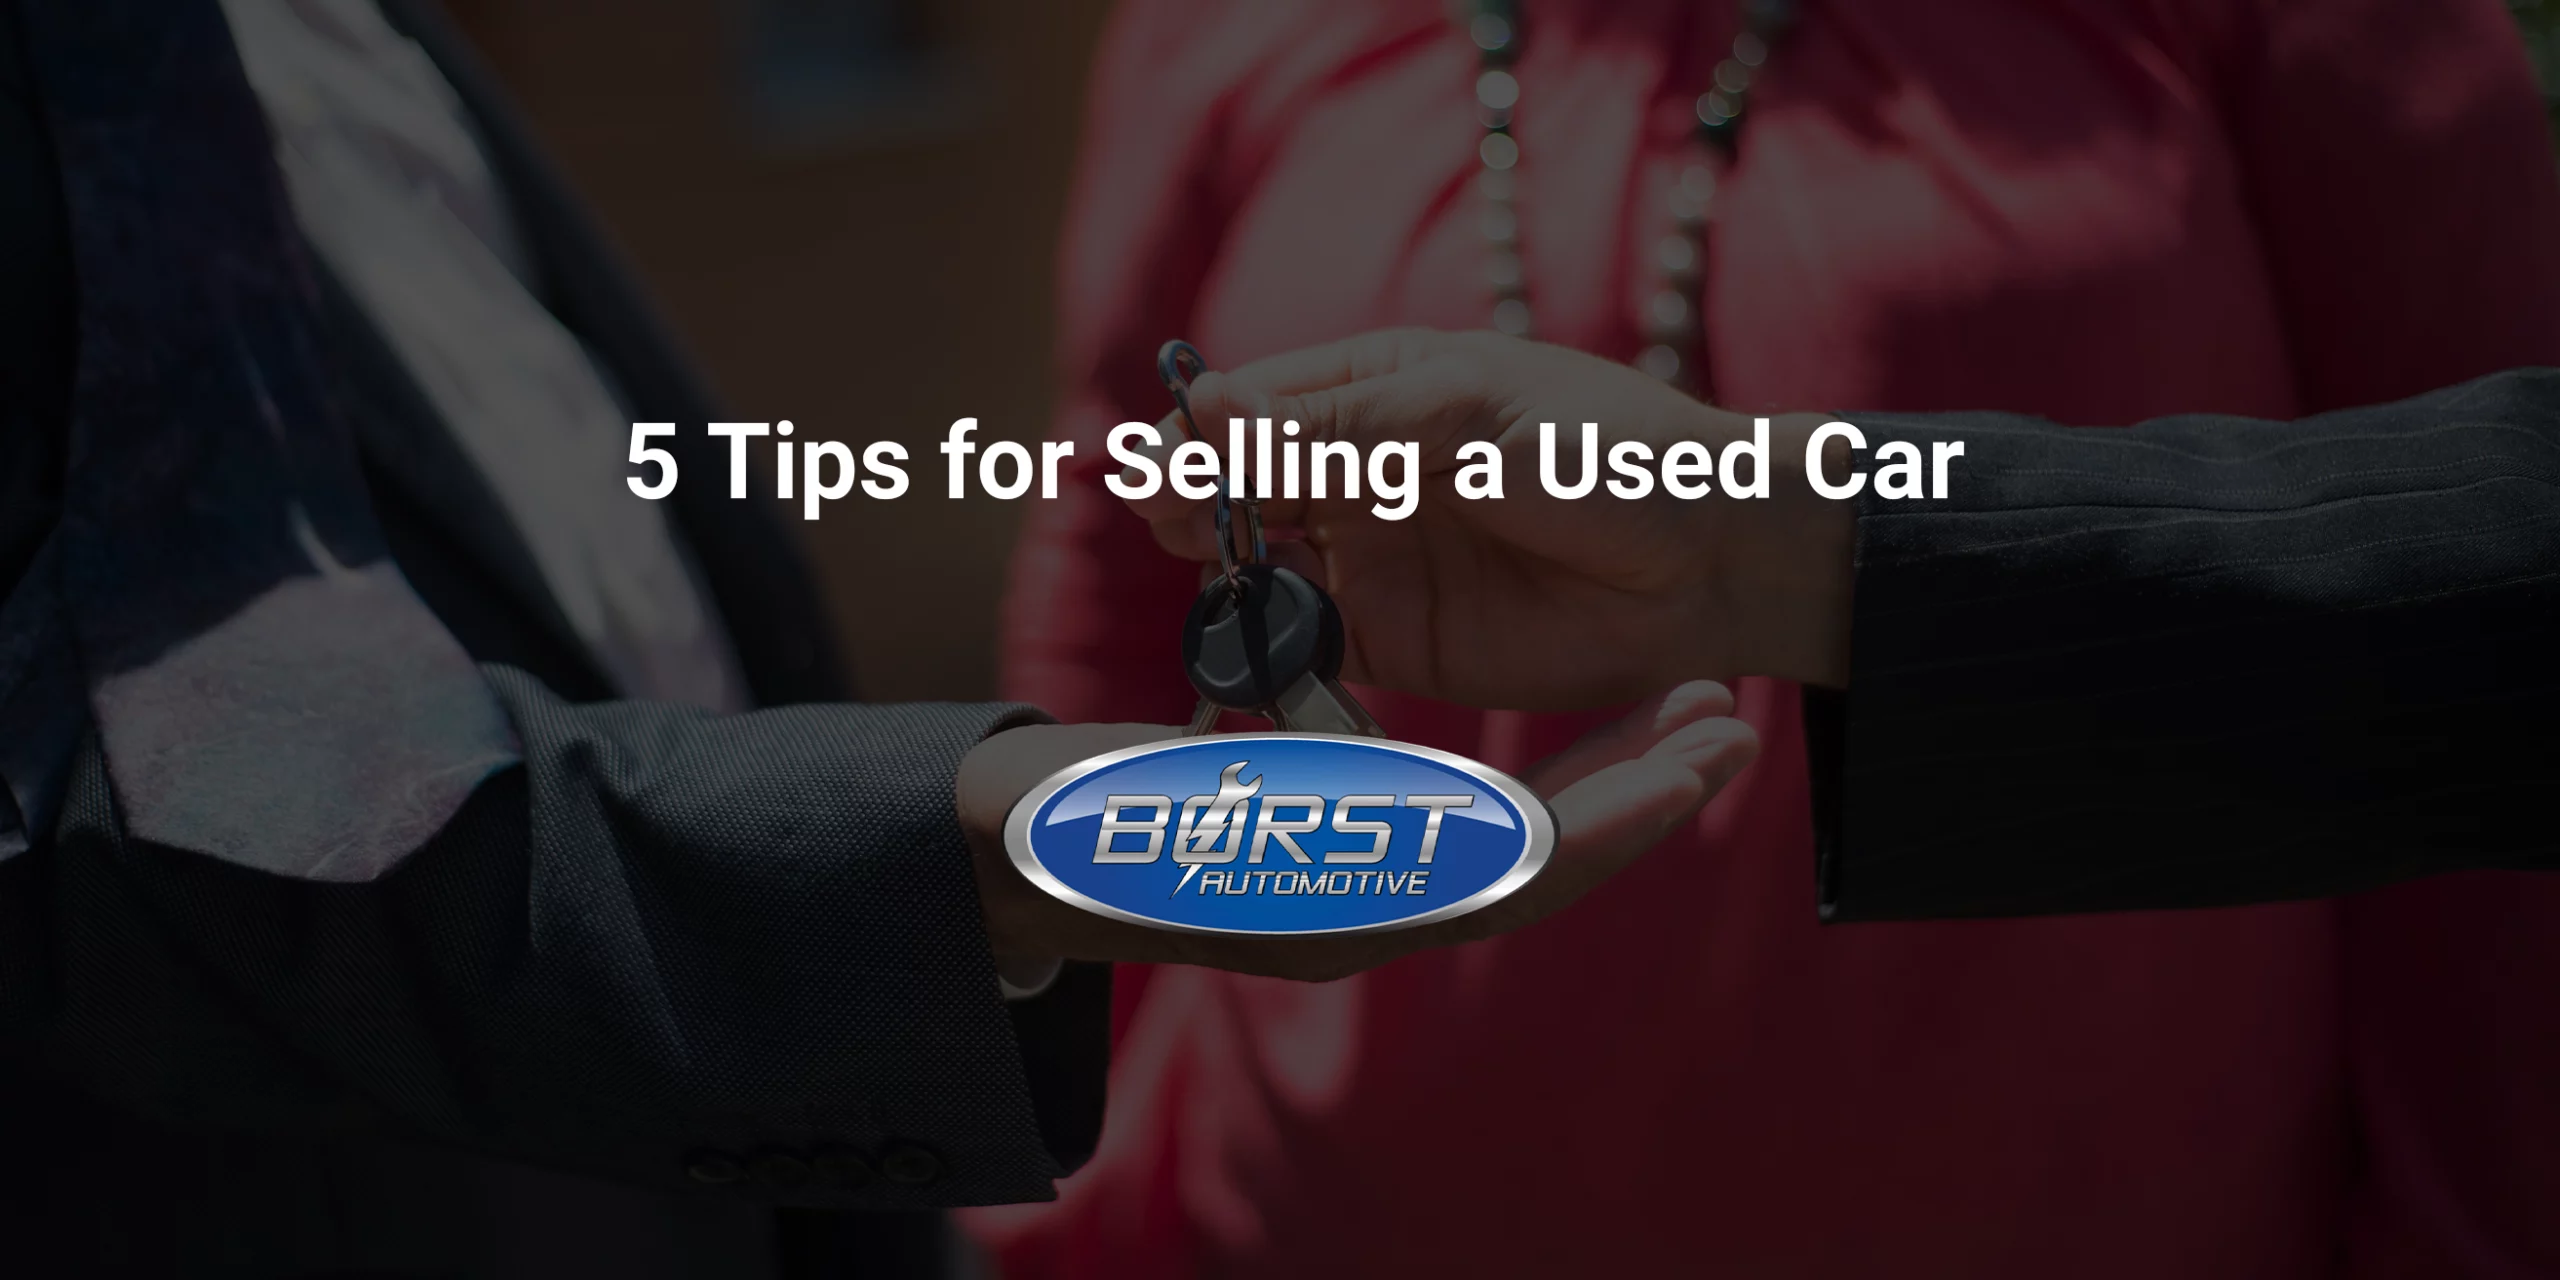 5 Tips for Selling a Used Car